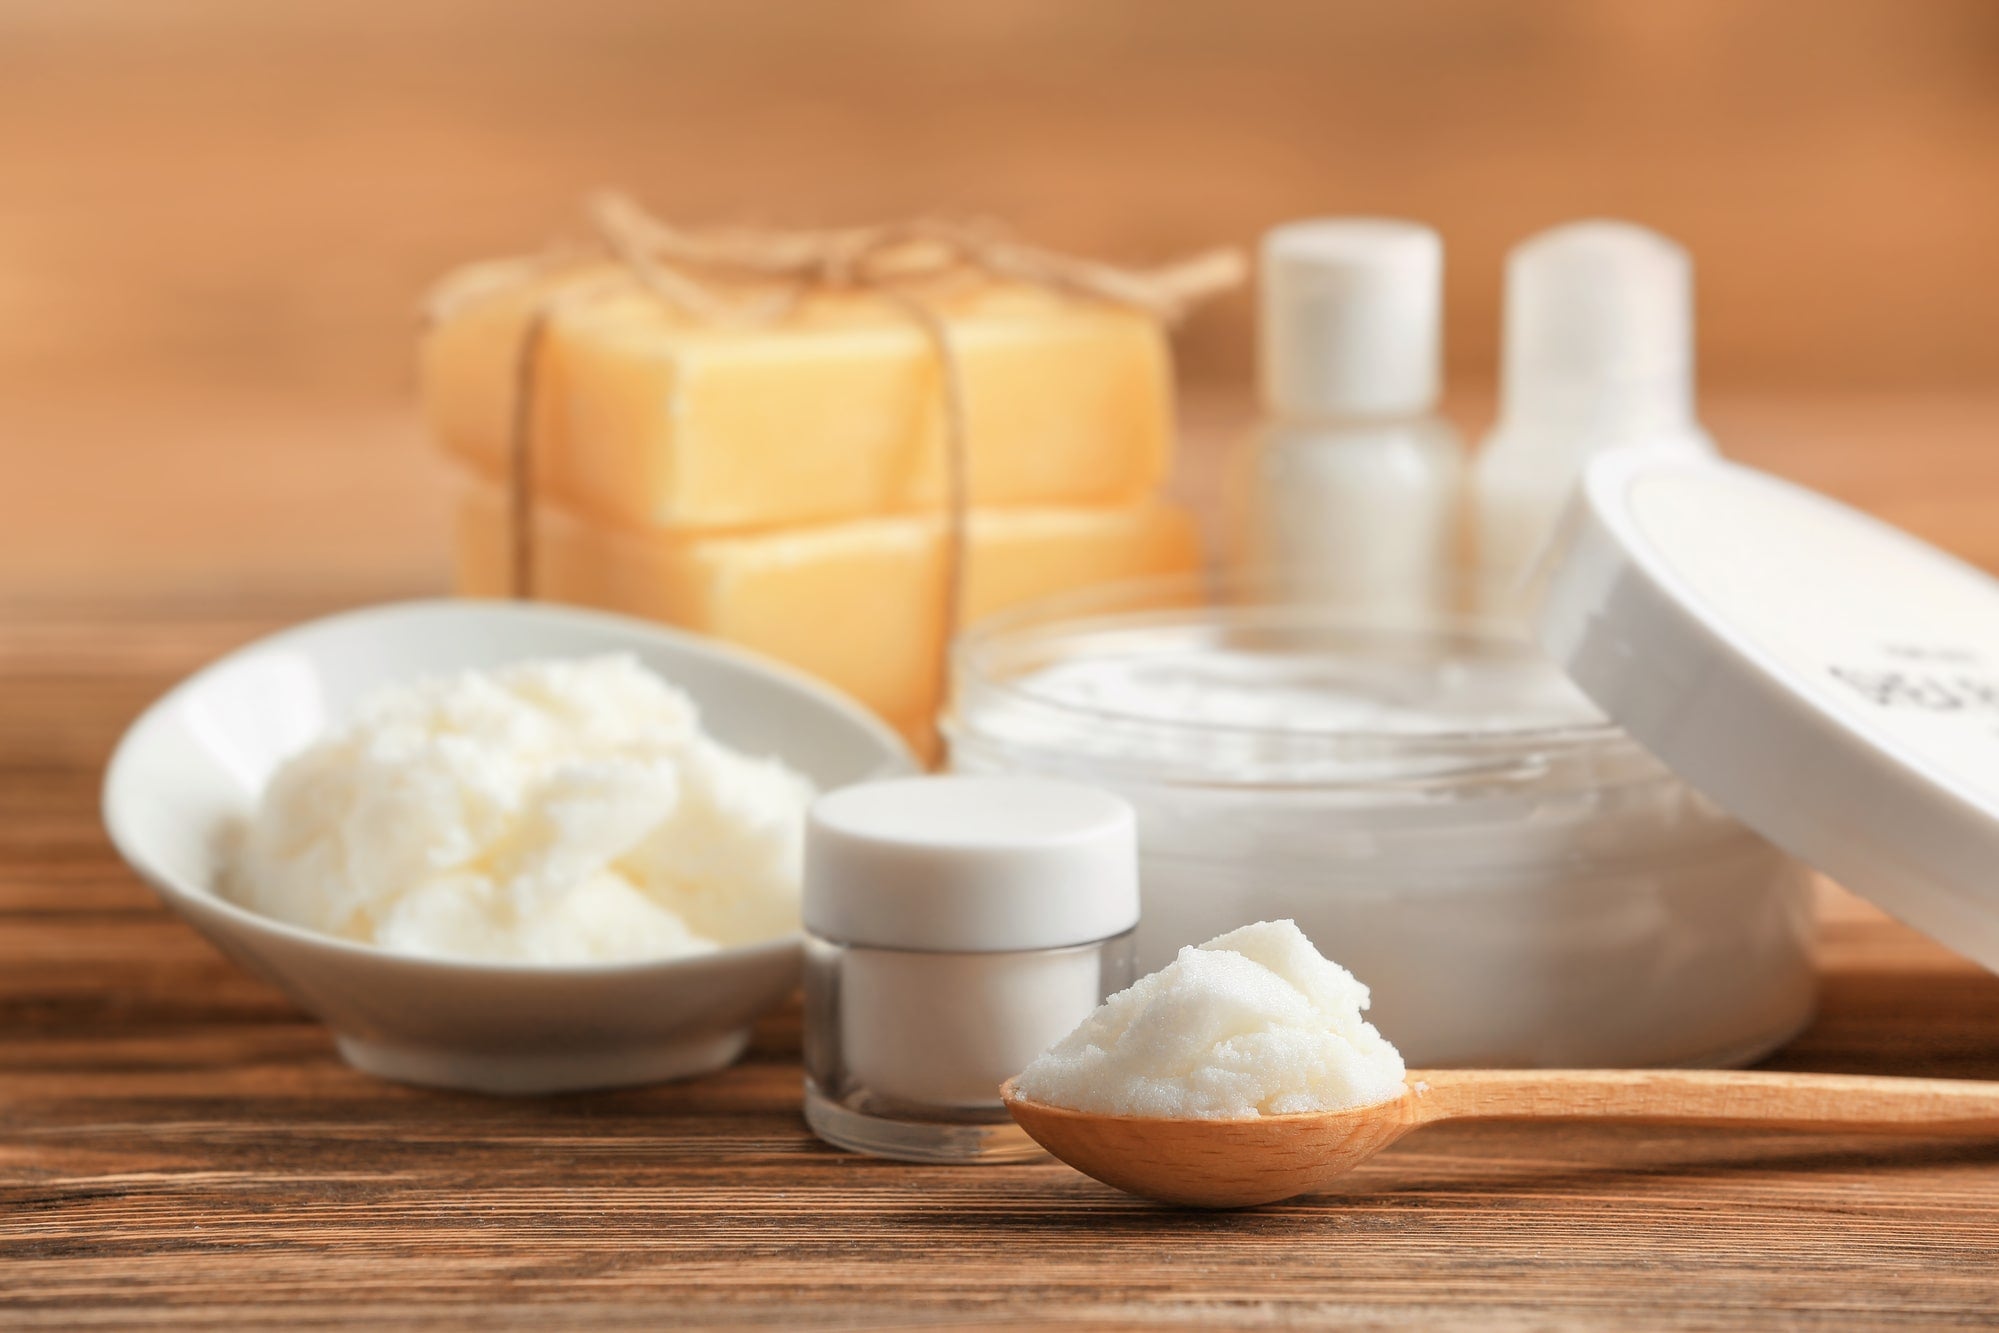 Shea Butter for Skin Care: Why it Work Wonders for Your Skin?